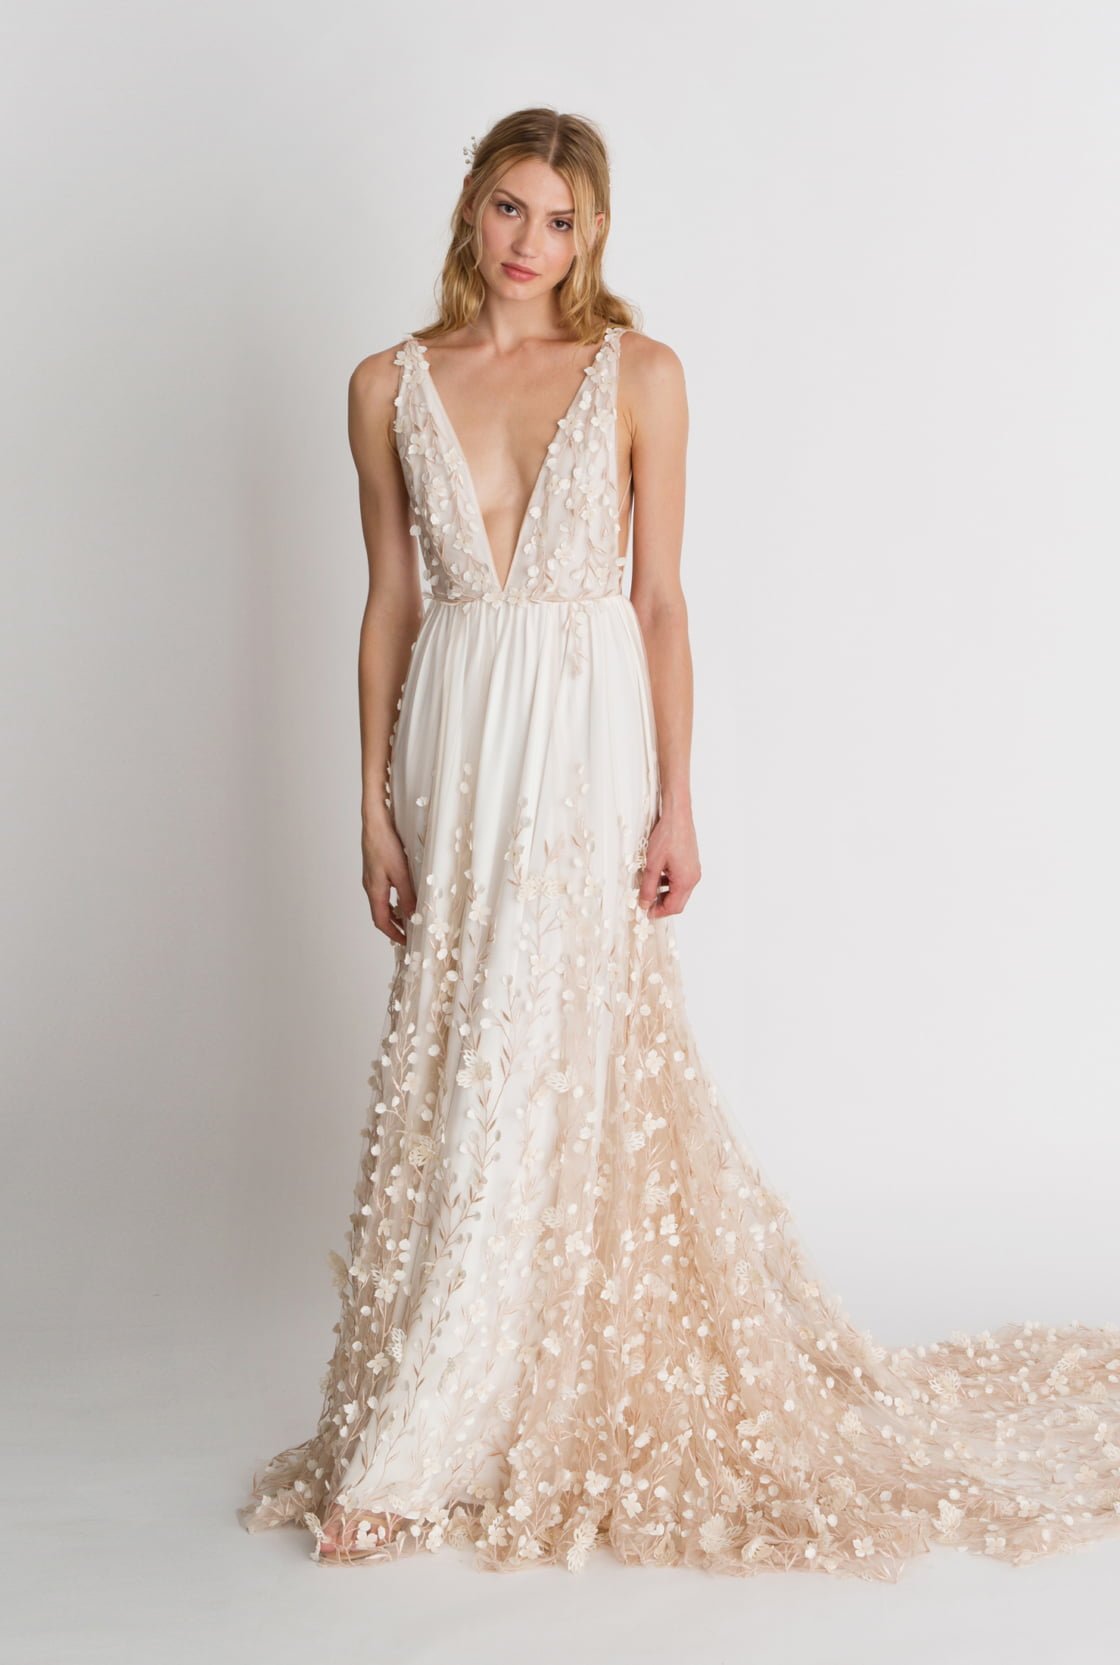 TOP 15 LUXE BRIDAL GOWNS – Hello May